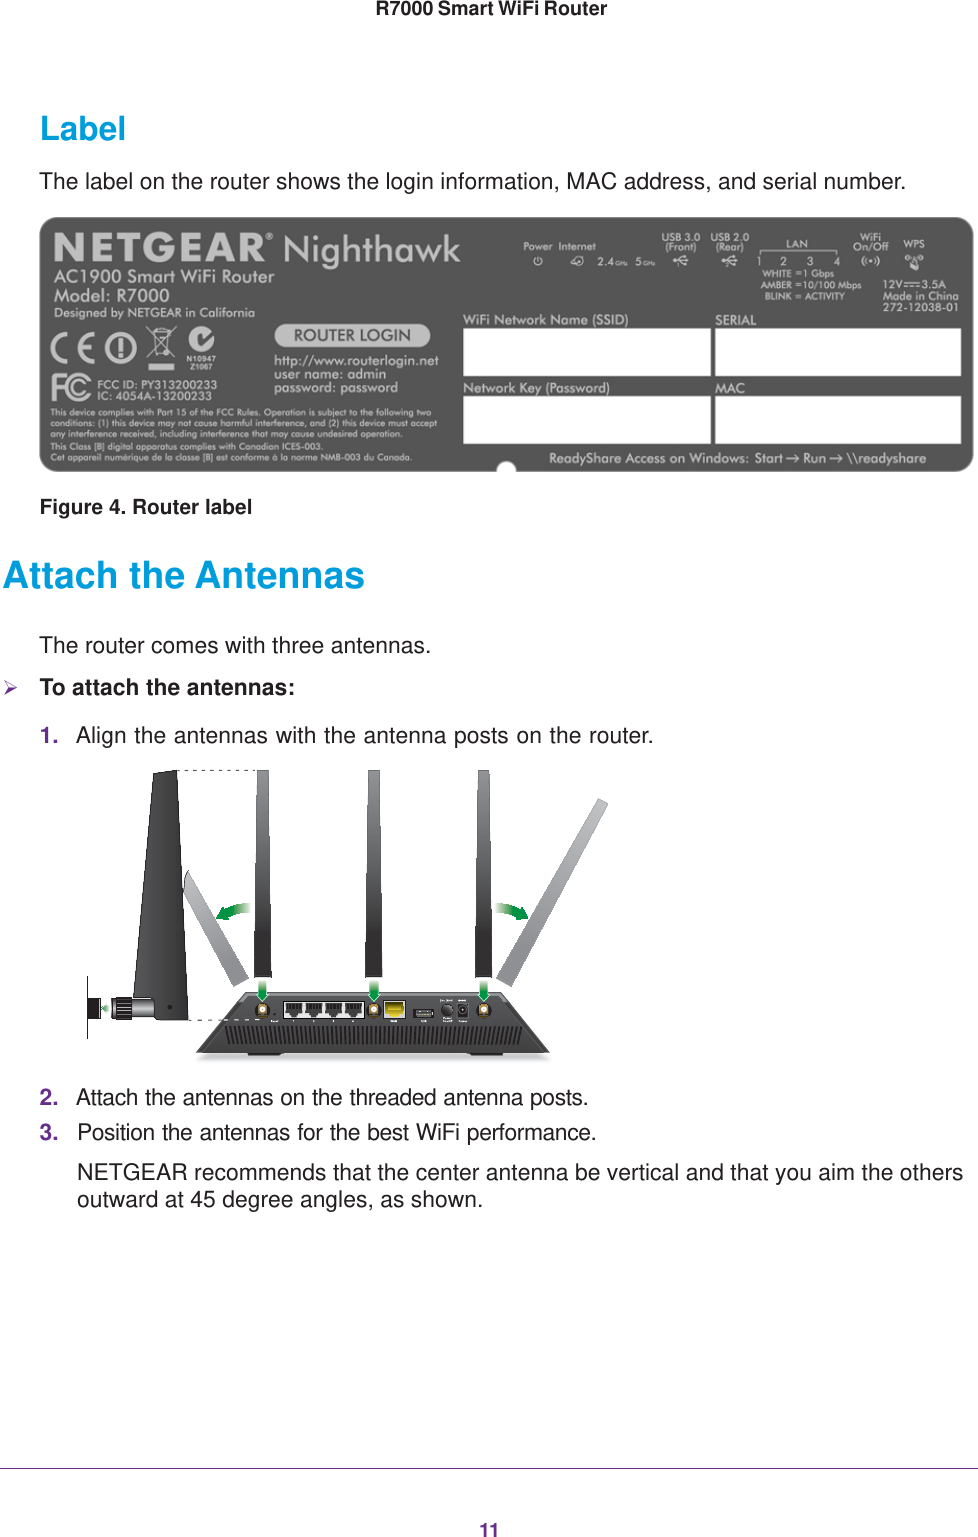 11 R7000 Smart WiFi RouterLabelThe label on the router shows the login information, MAC address, and serial number.Figure 4. Router labelAttach the AntennasThe router comes with three antennas.To attach the antennas:1. Align the antennas with the antenna posts on the router.2. Attach the antennas on the threaded antenna posts.3. Position the antennas for the best WiFi performance.NETGEAR recommends that the center antenna be vertical and that you aim the others outward at 45 degree angles, as shown.